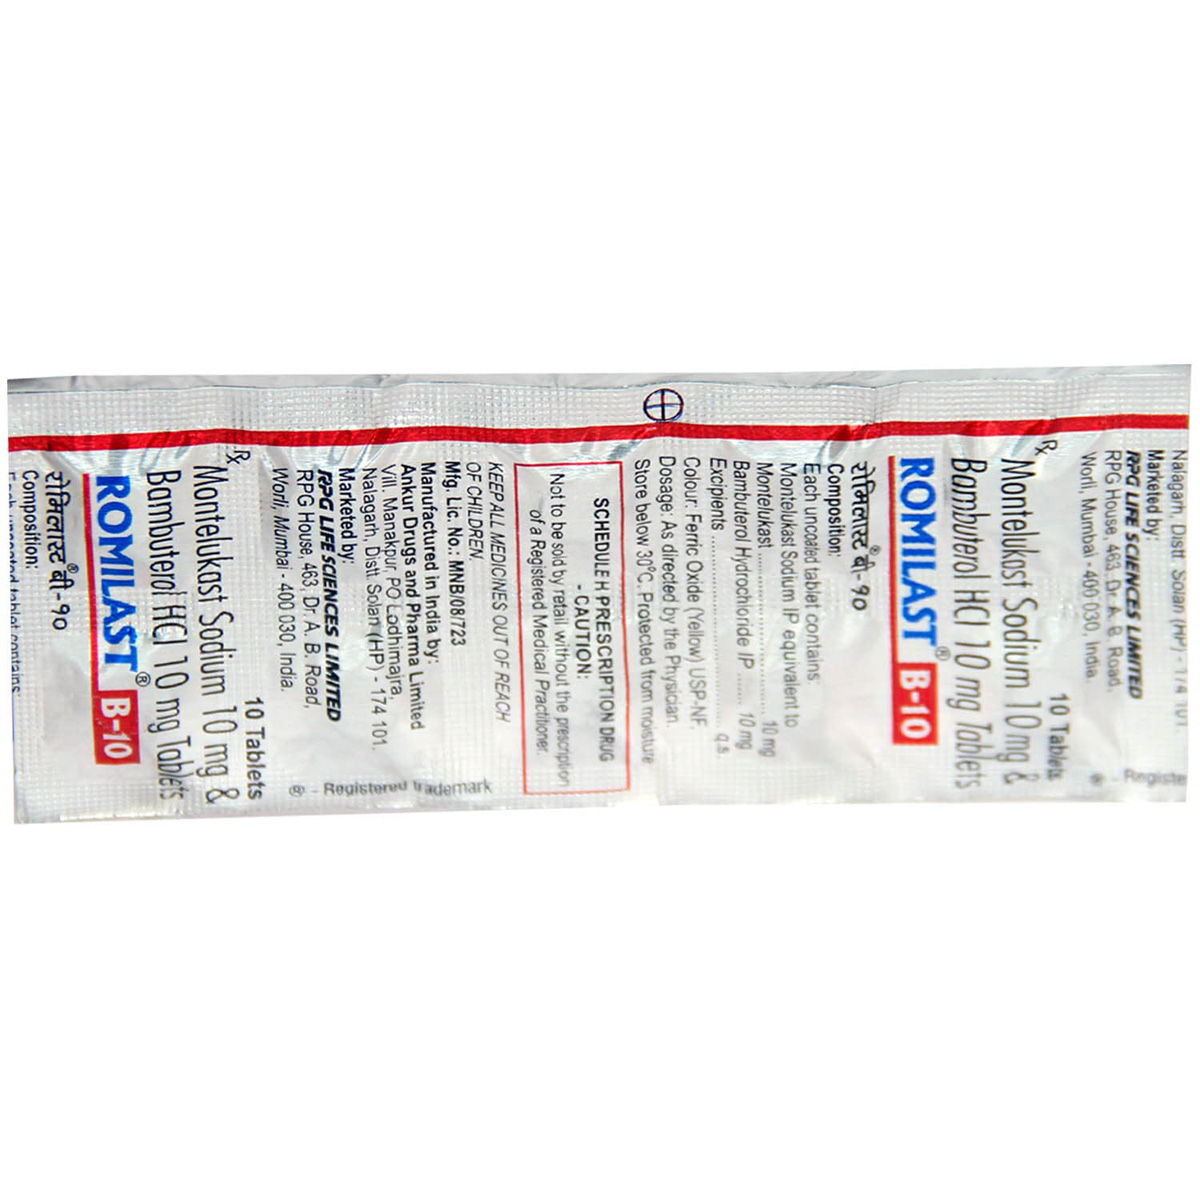 Romilast B 10 Tablet 10's, Pack of 10 TABLETS